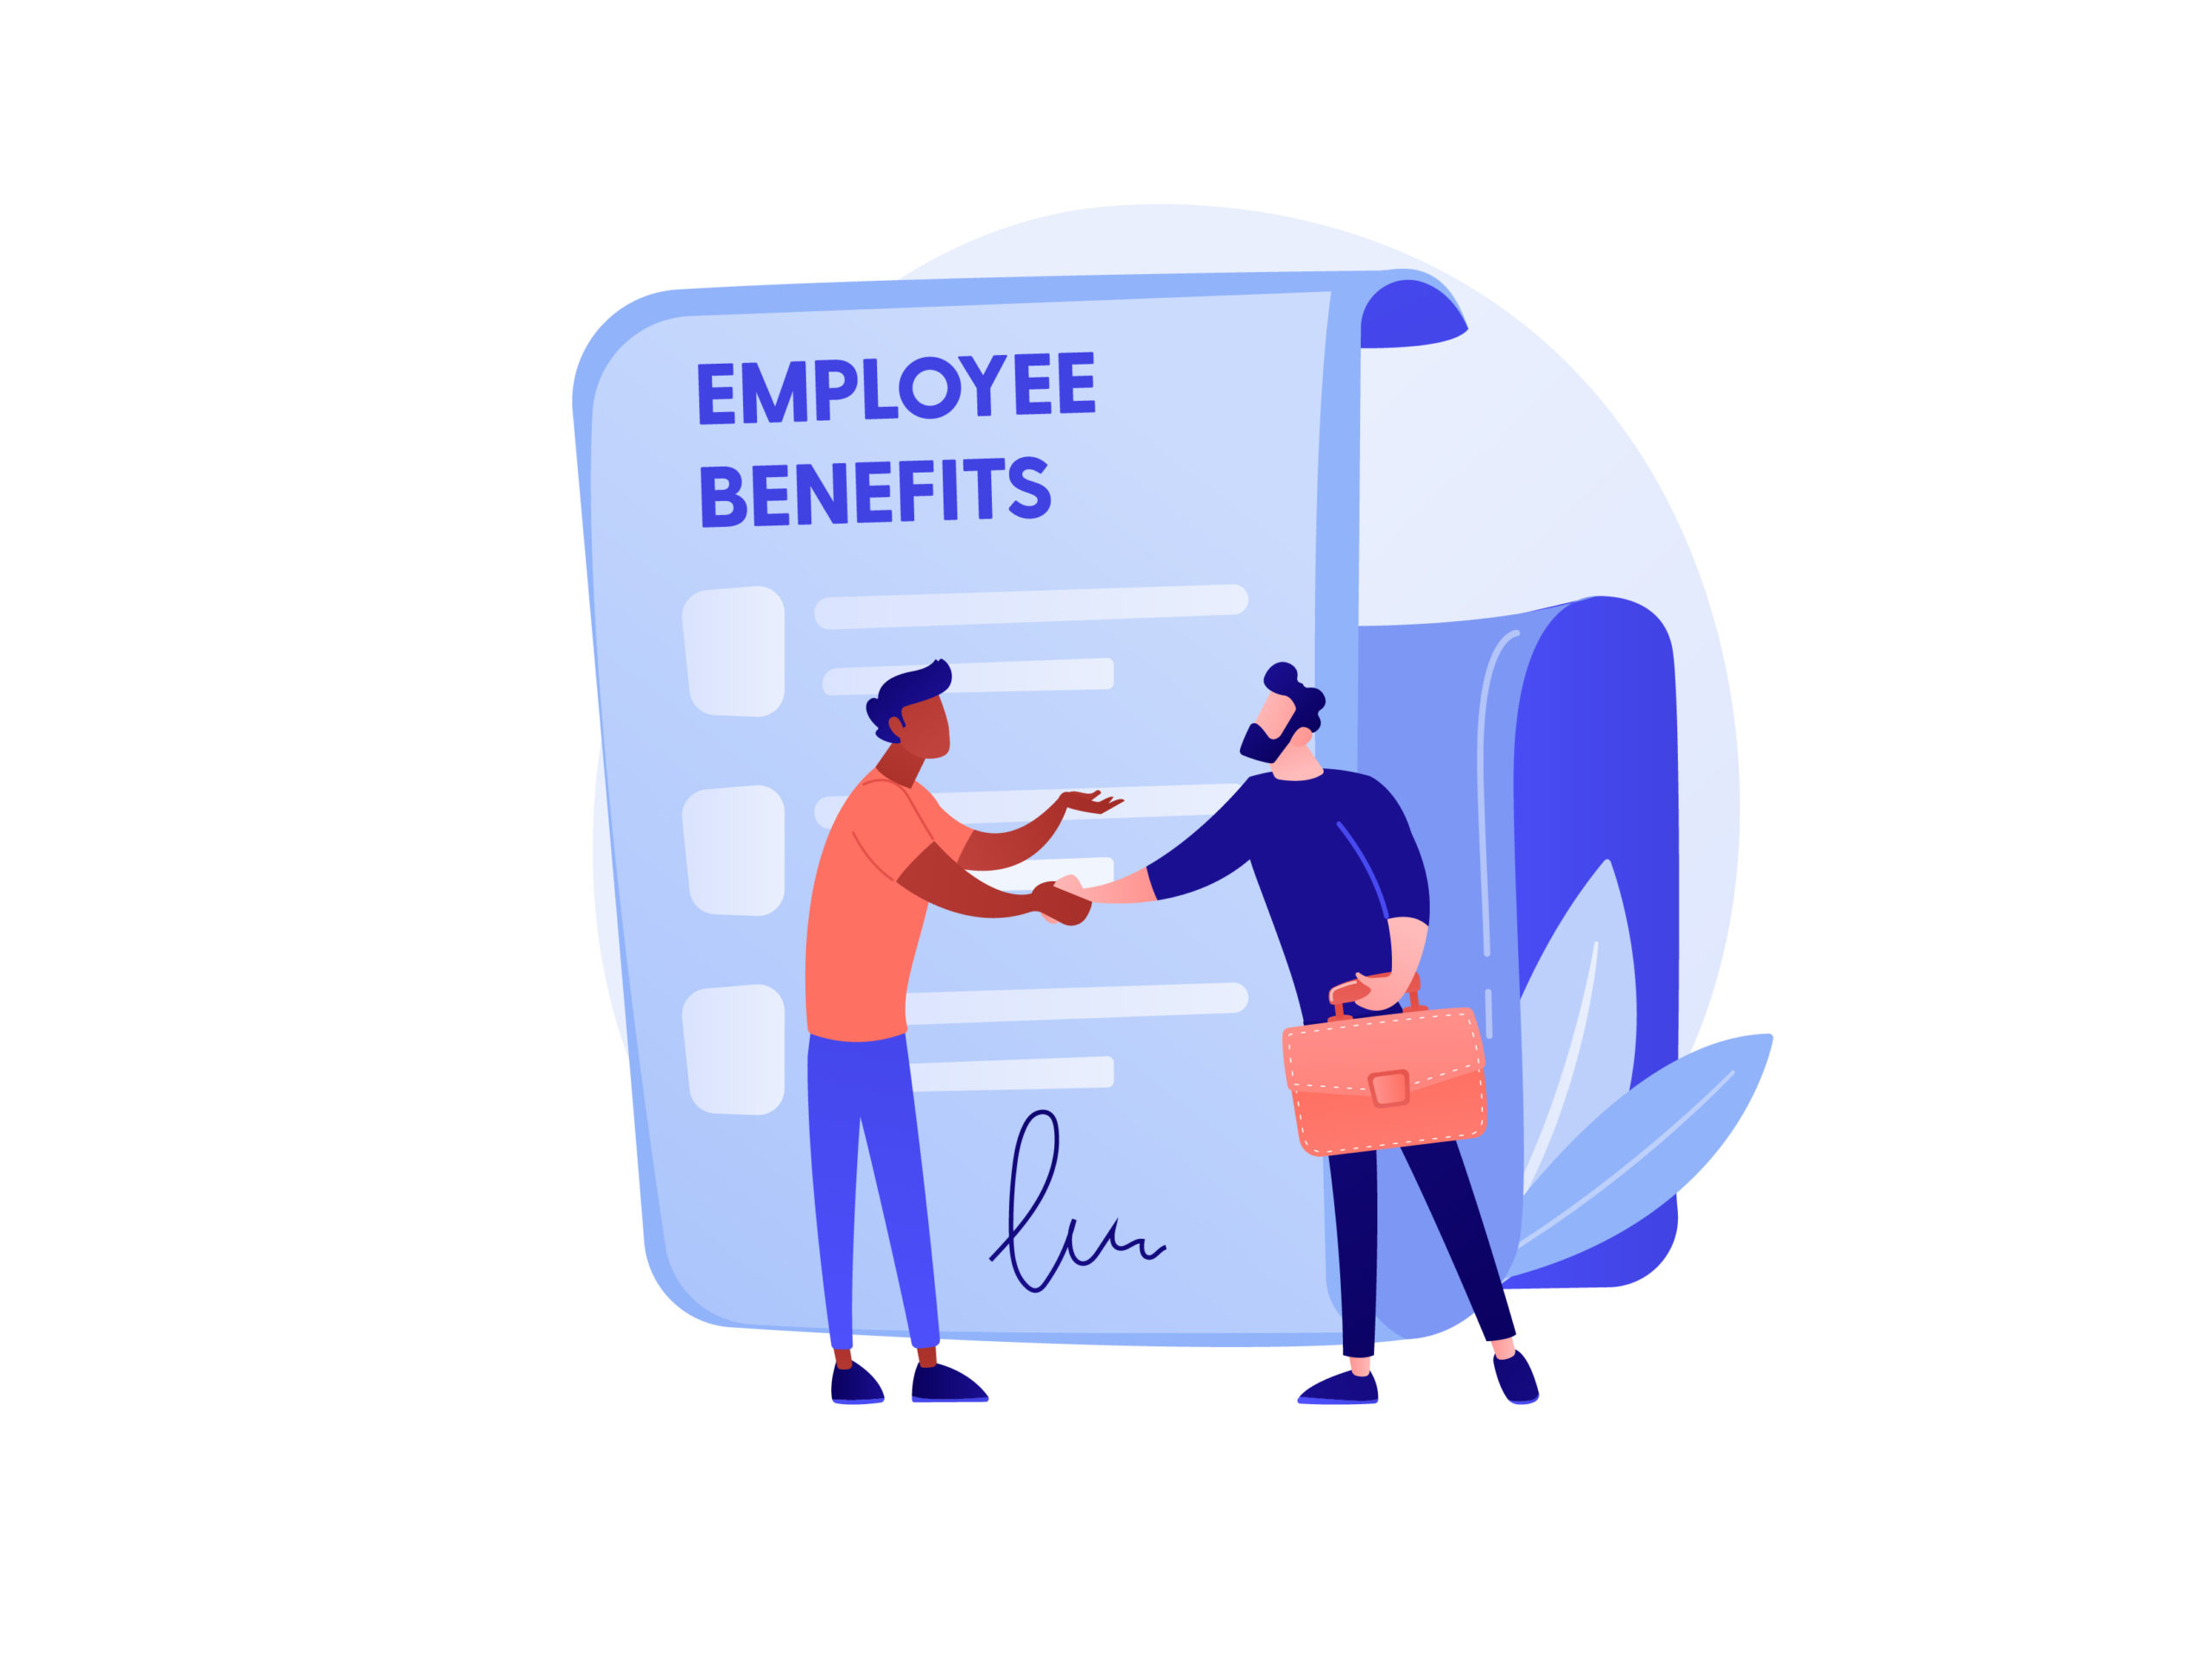 3 common mistakes that cost your employee benefits ROI